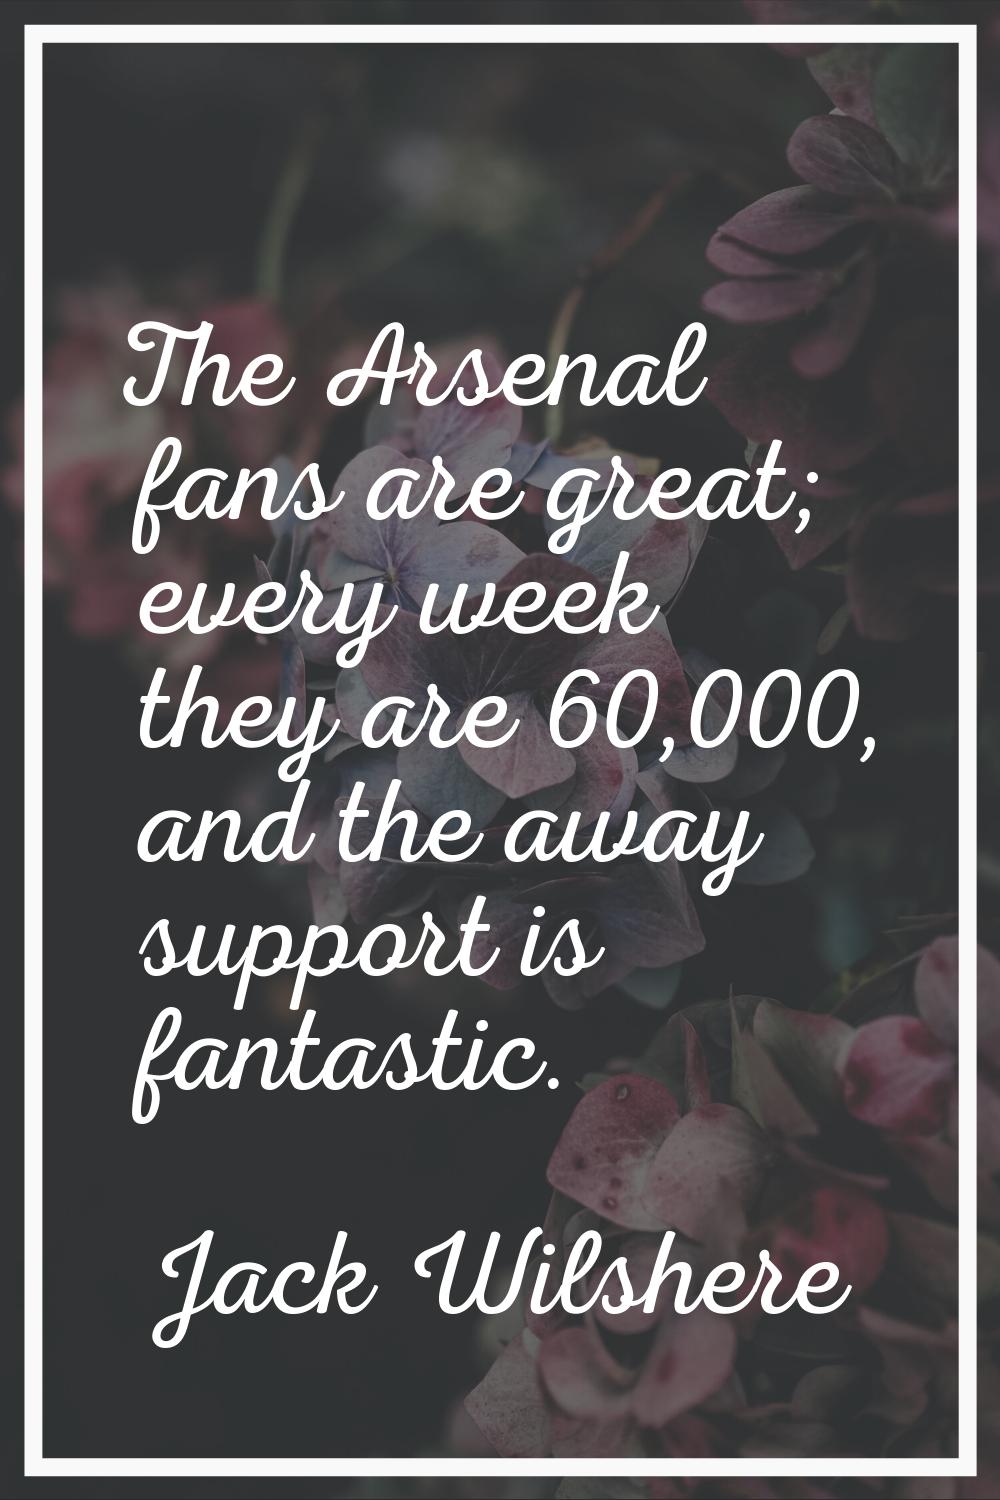 The Arsenal fans are great; every week they are 60,000, and the away support is fantastic.